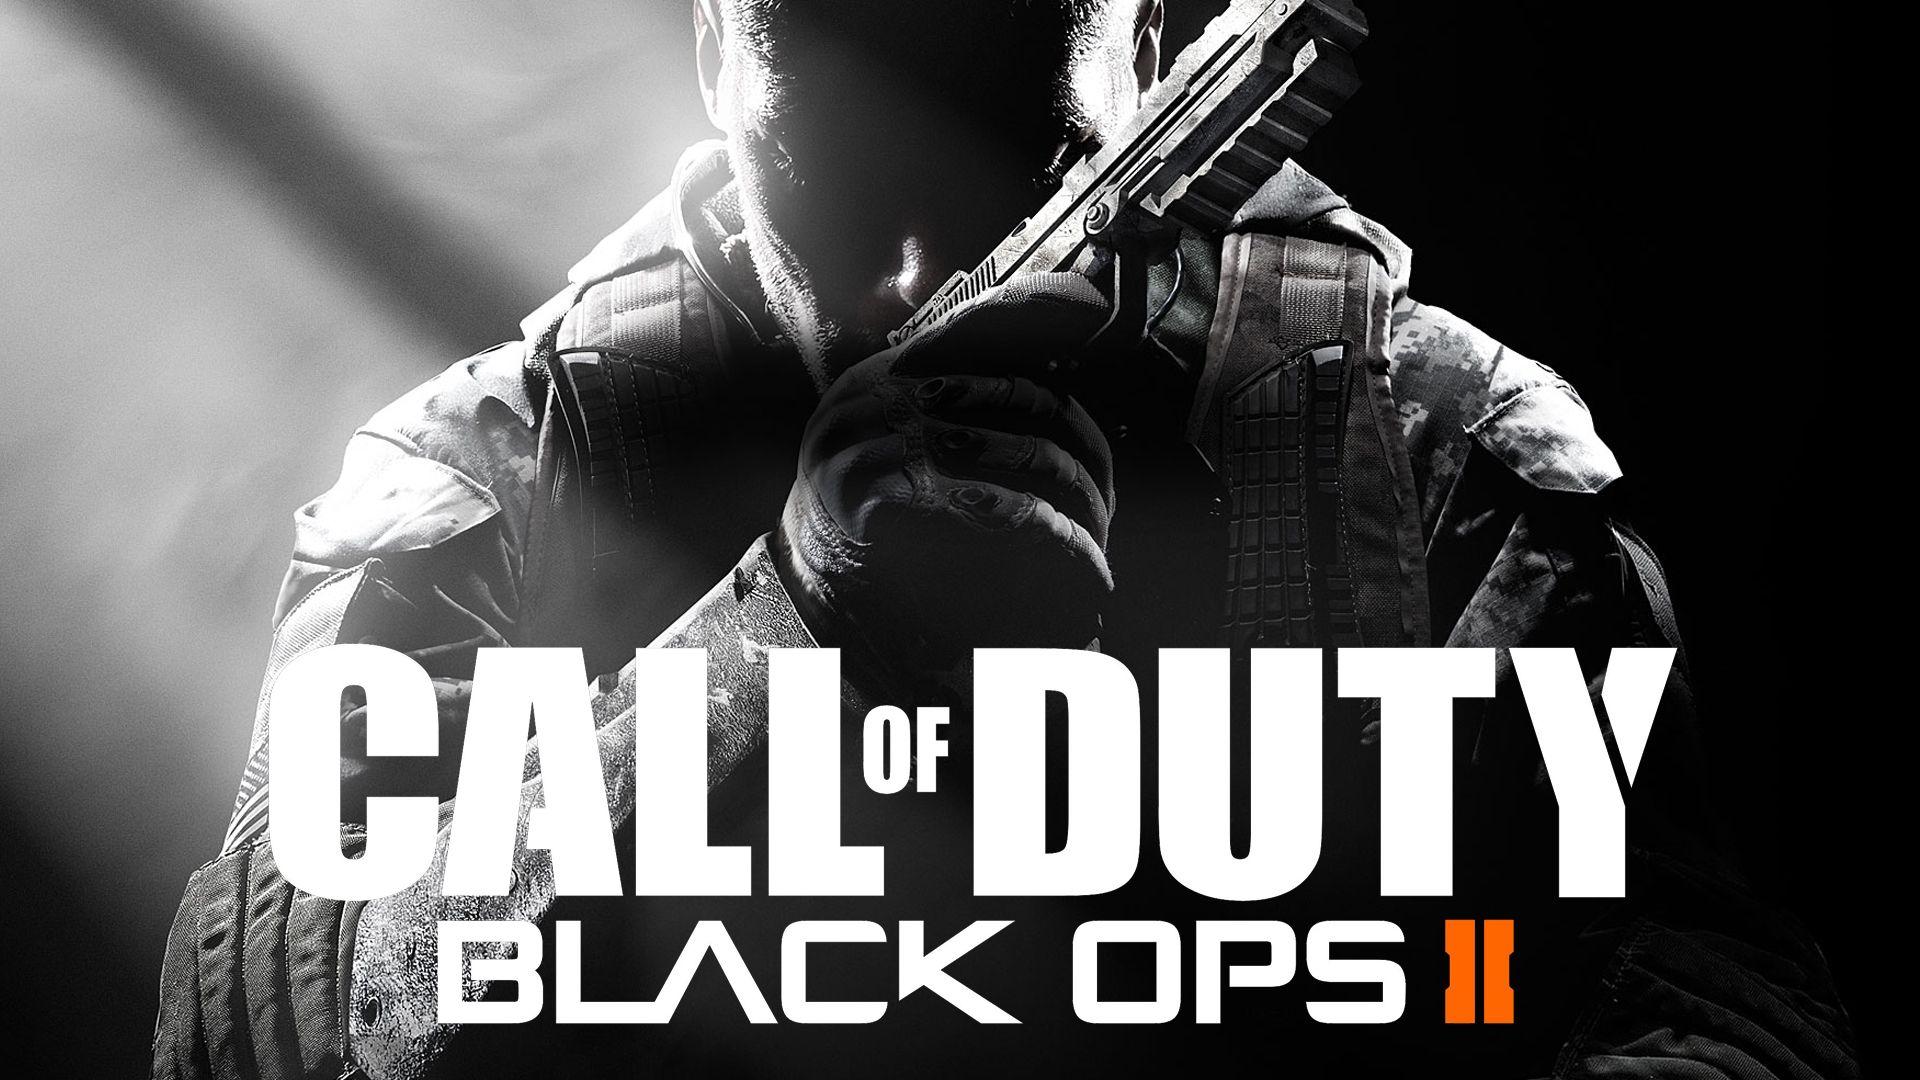 Call of duty black ops 2 HD Wallpaper, Background Image